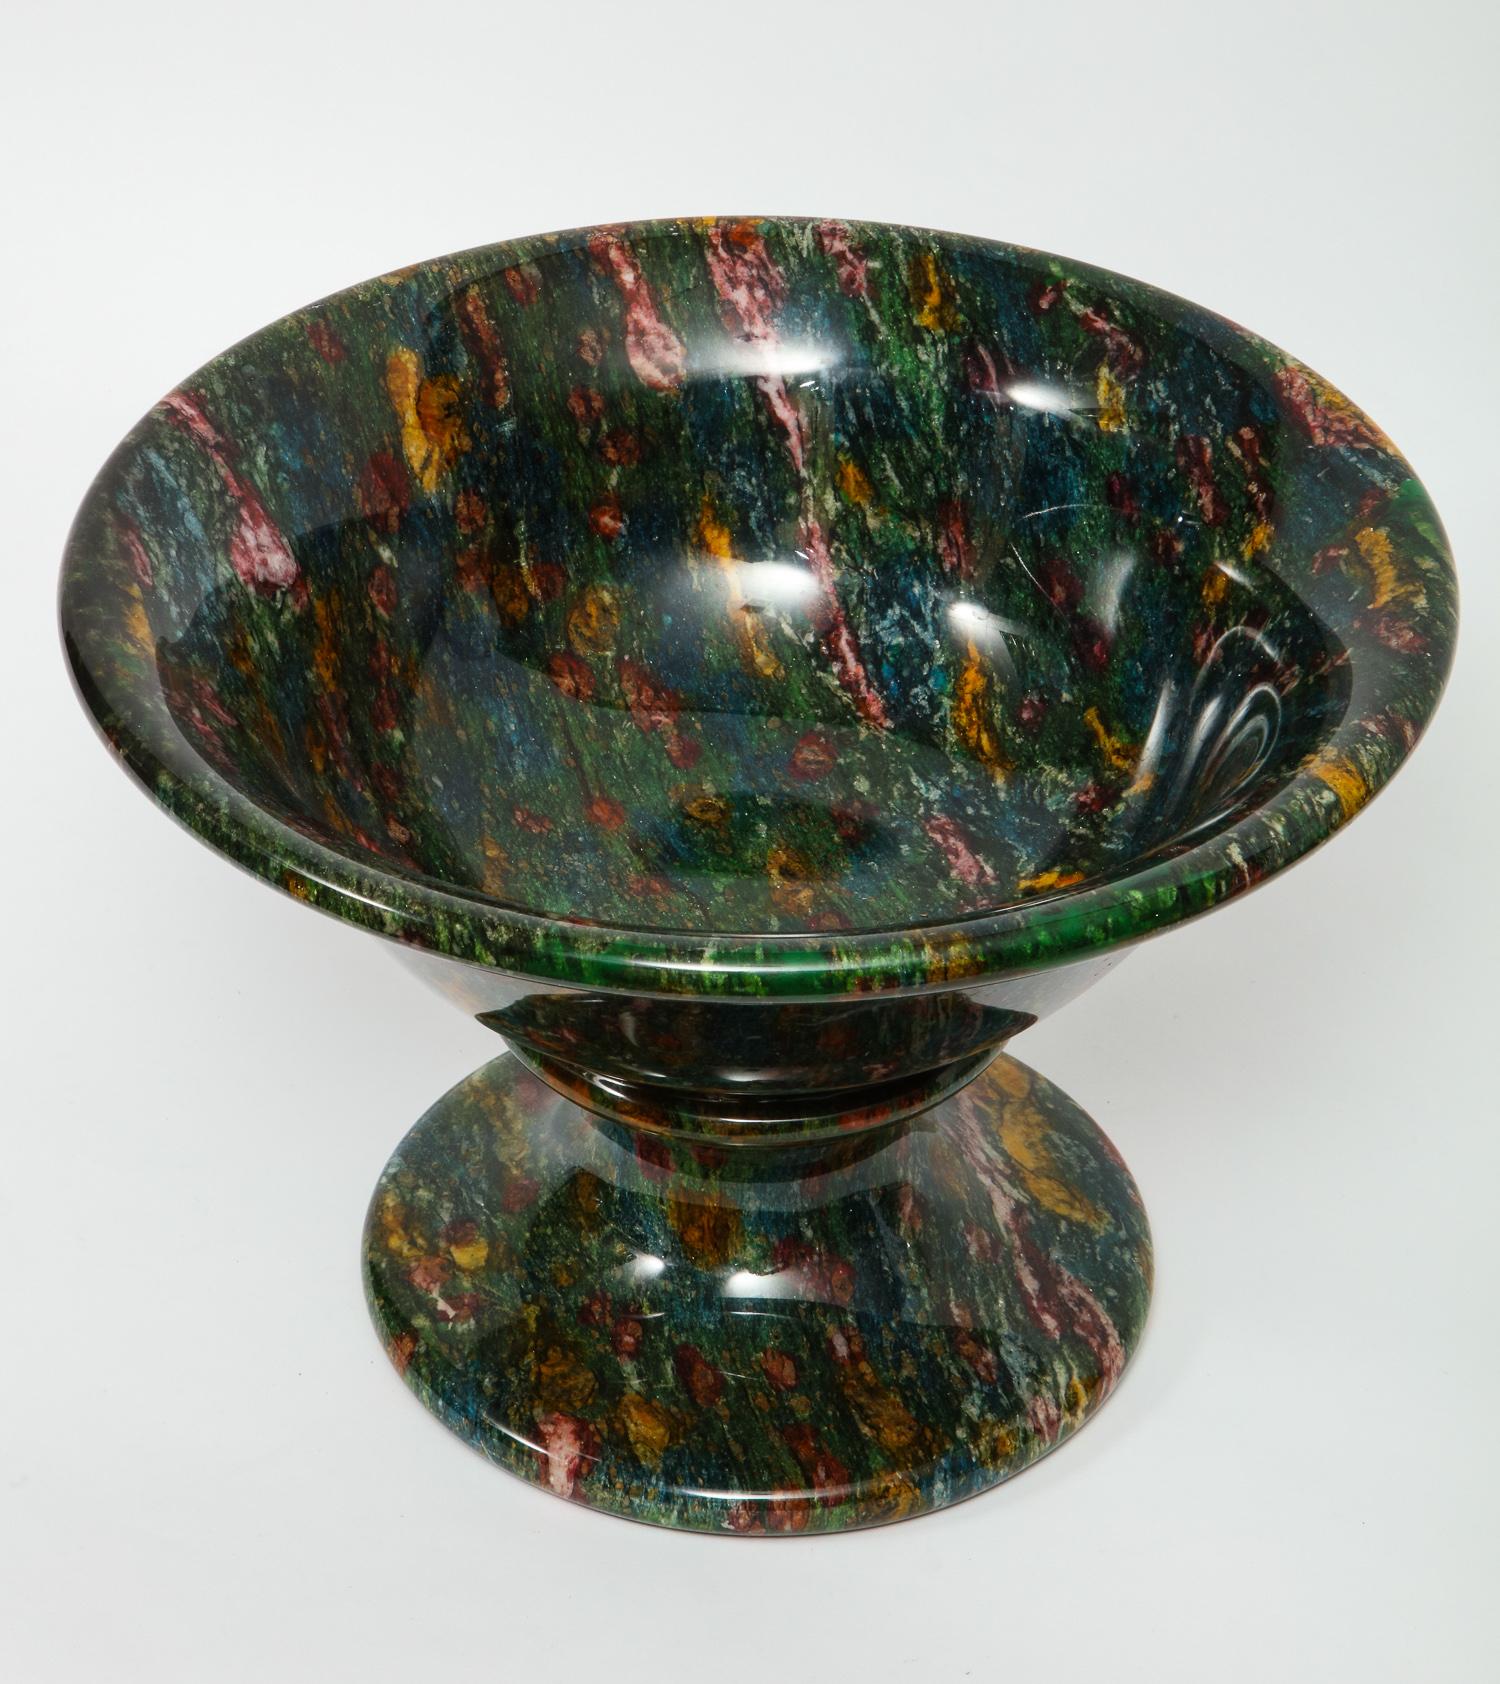 A rare and large decorative green jasper bowl,
Suitable for use as a fruit bowl or other presentation. The color is deep rich green with yellow, ochre, burgundy and white veining. Raised on a shaped stem and foot.

This green variety of jasper